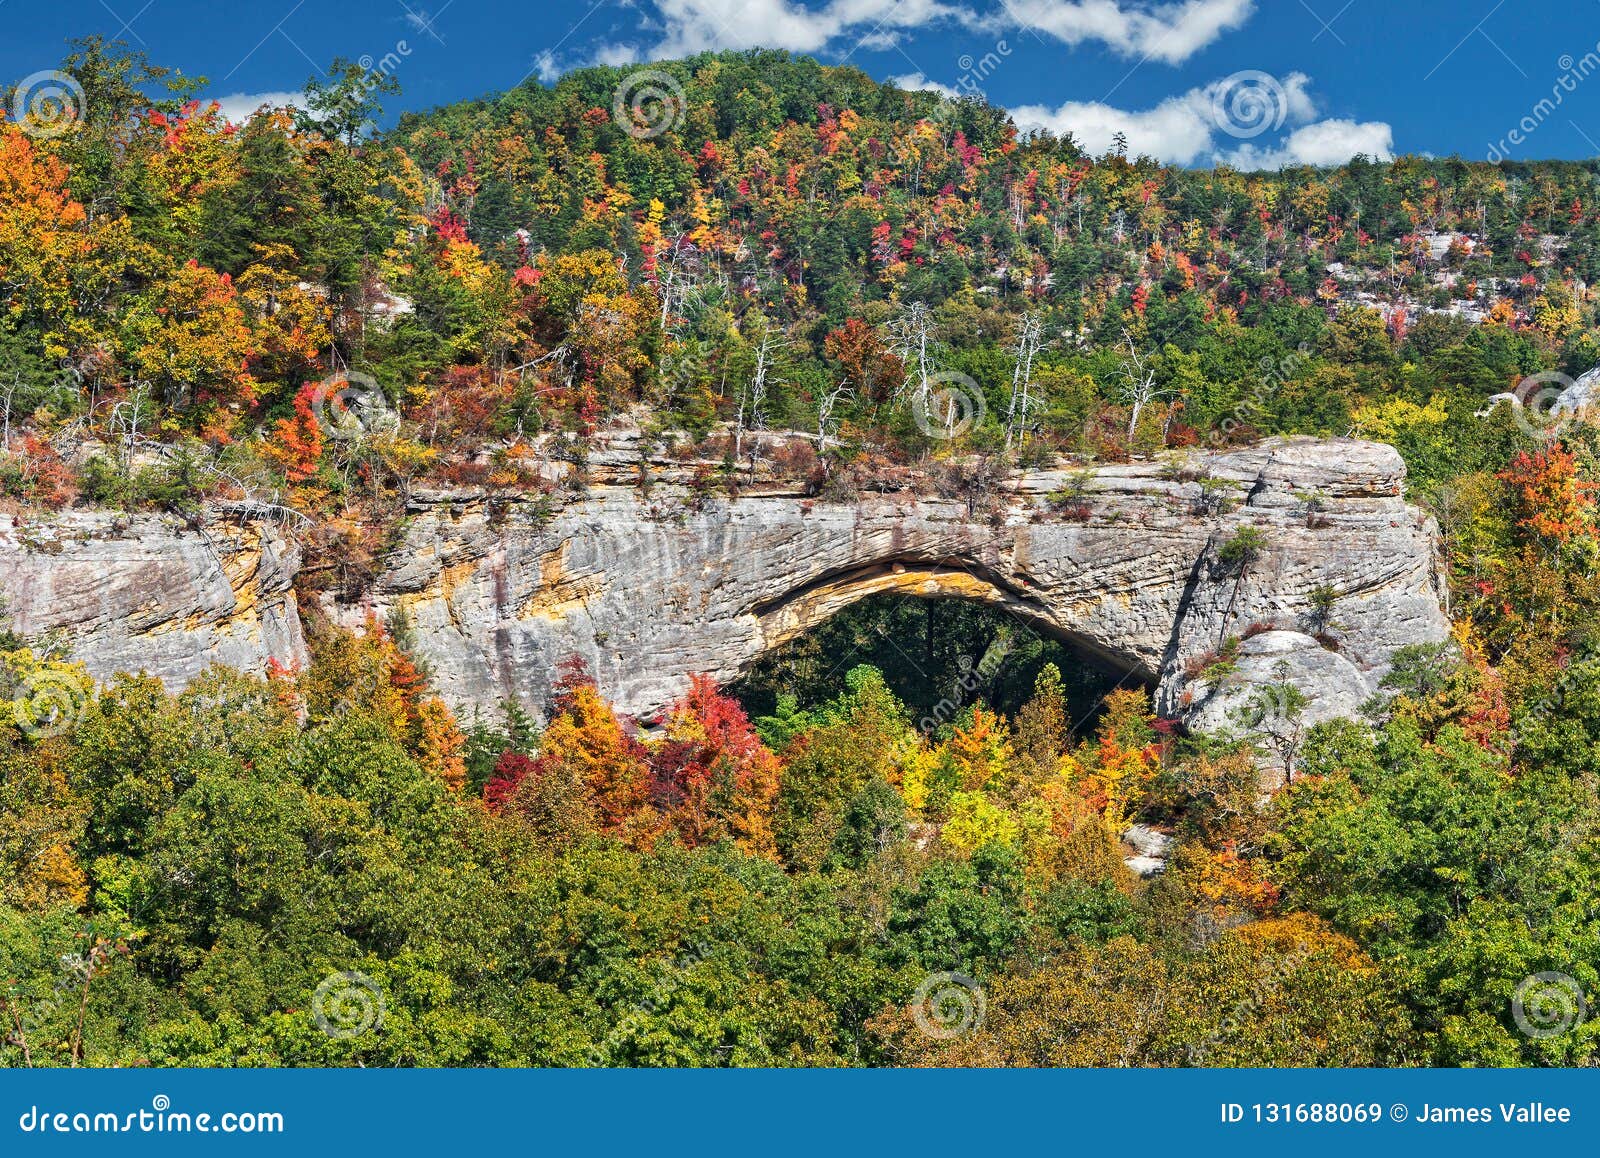 natural arch scenic area at parkers lake kentucky in the daniel boone national forest